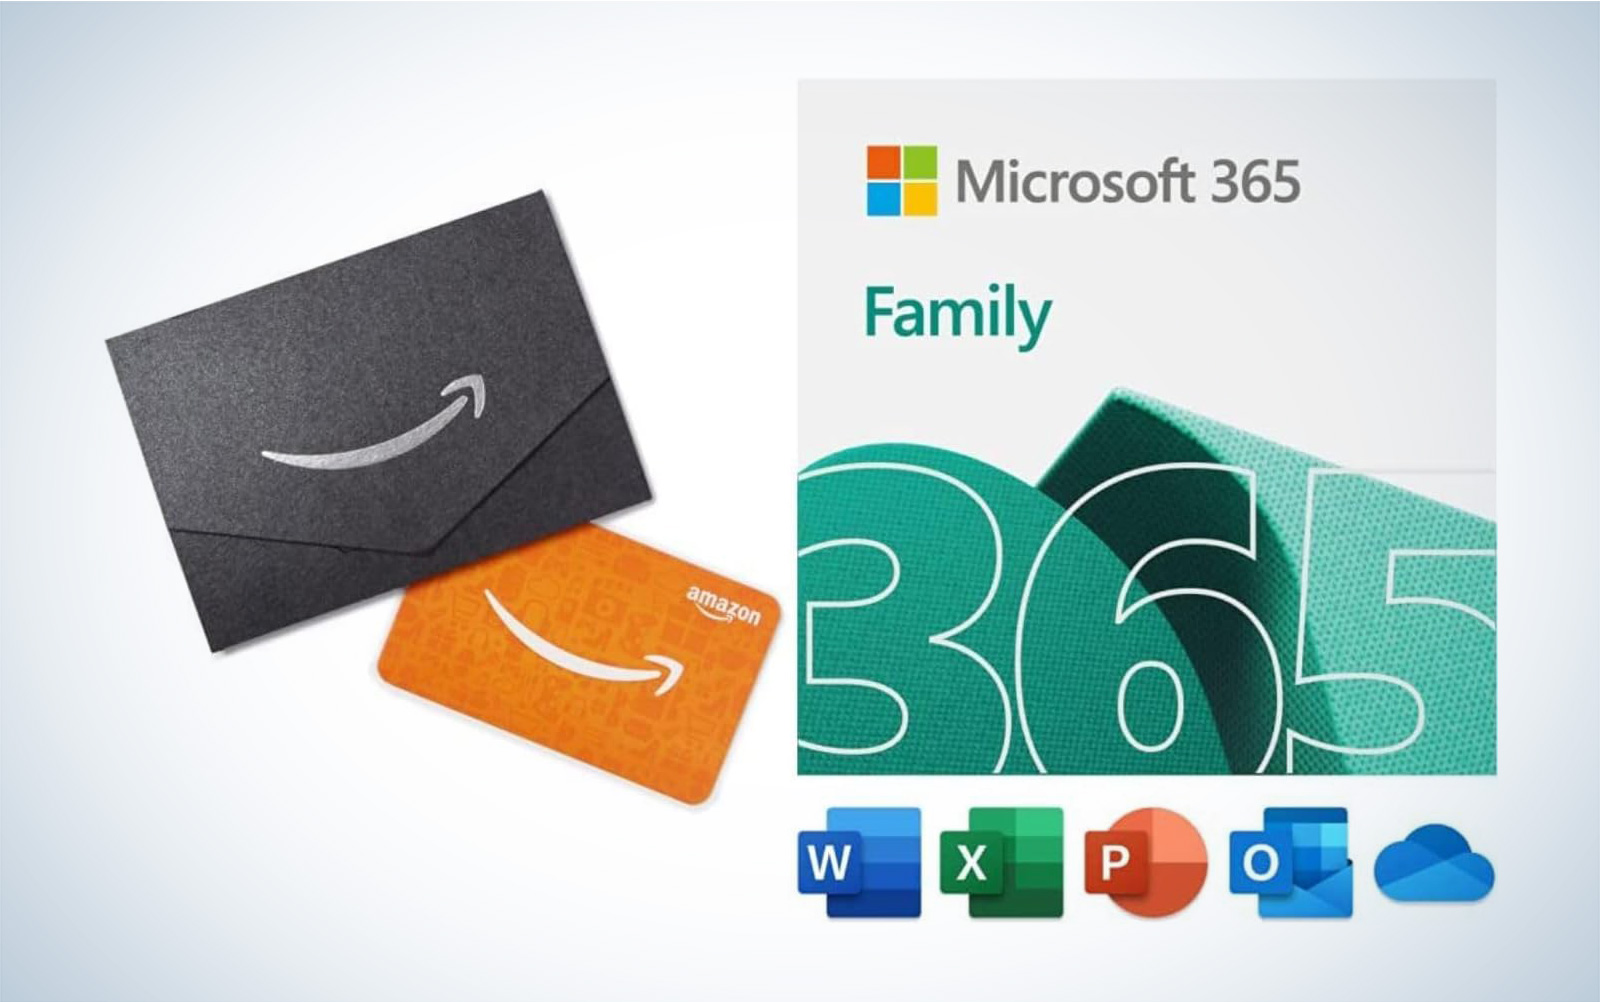 Save more than 42% on Microsoft Office 365 during Amazon Prime Day